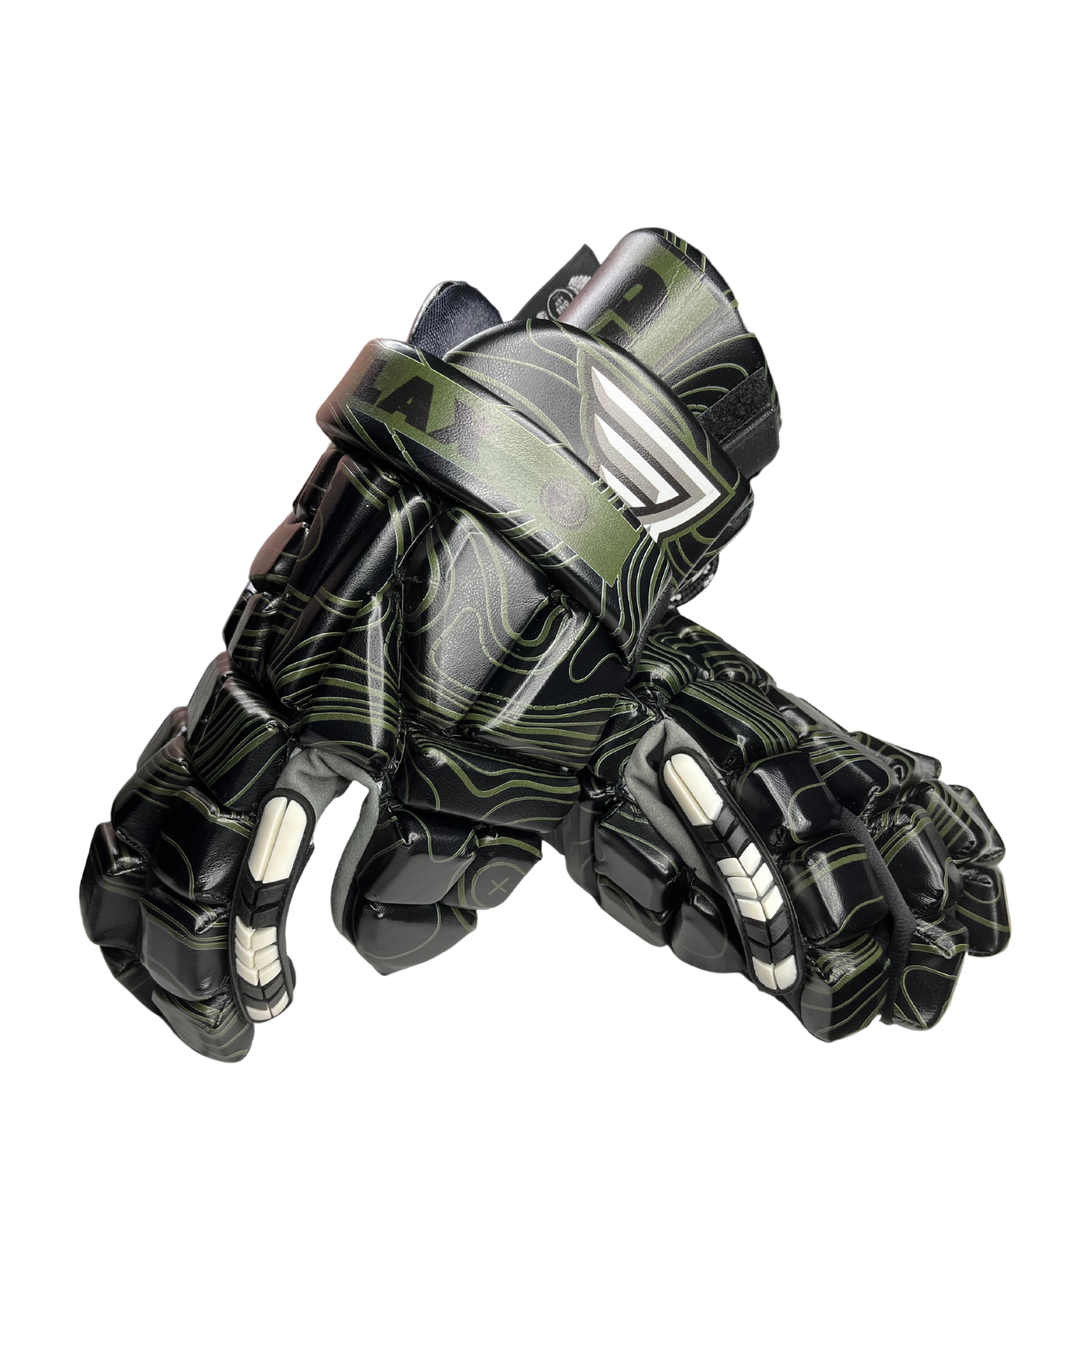 1 Gloves in Geo Wave Pattern Theme | 4 Adult Sizes Available | HYBRID Box & Field Gloves | Limited Edition - One Lax